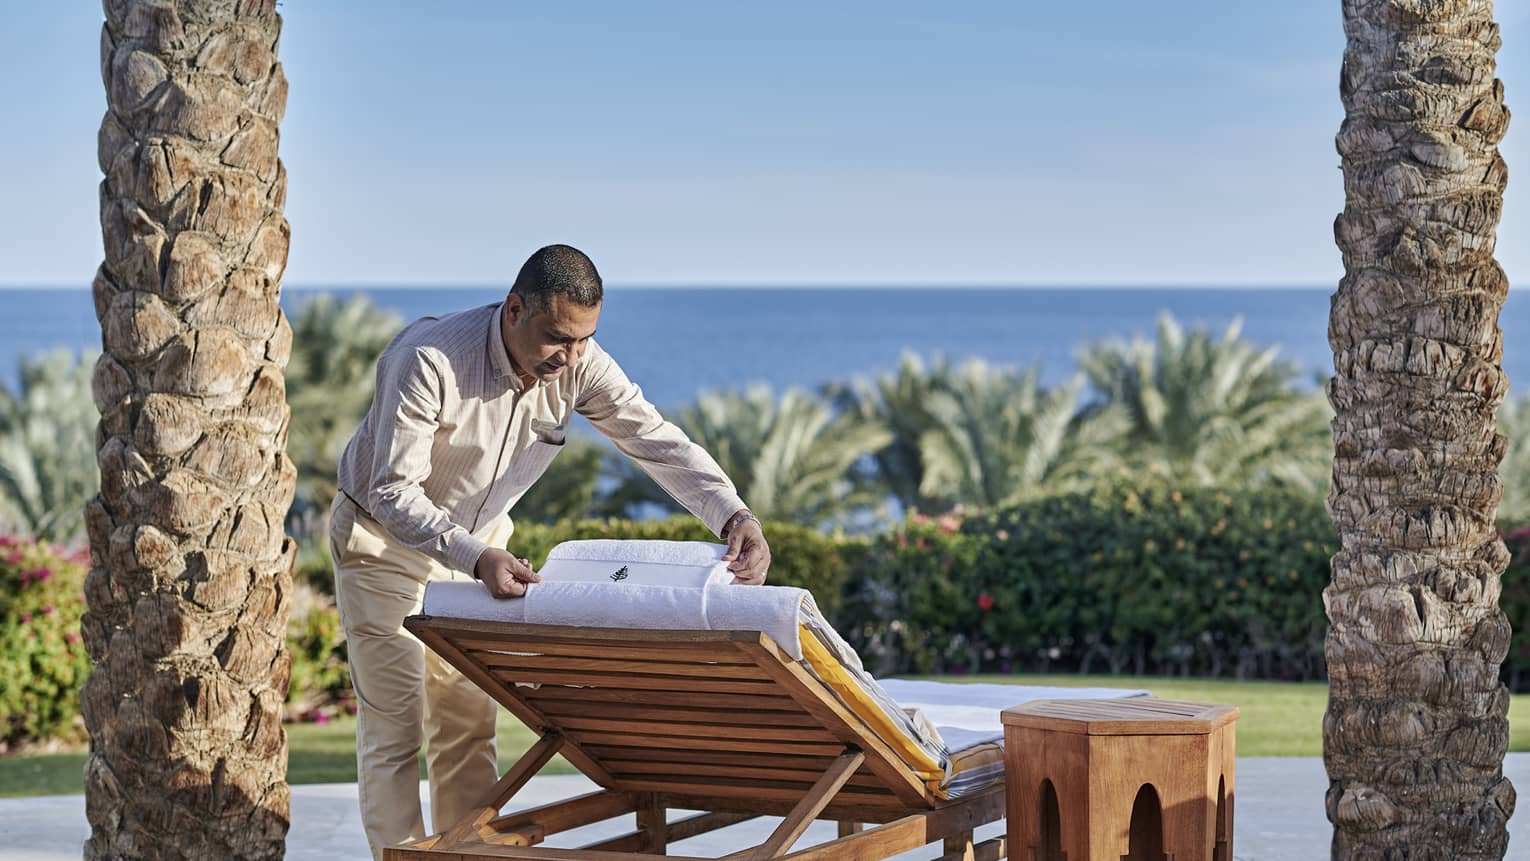 Man arranging a pool chair with sea in background